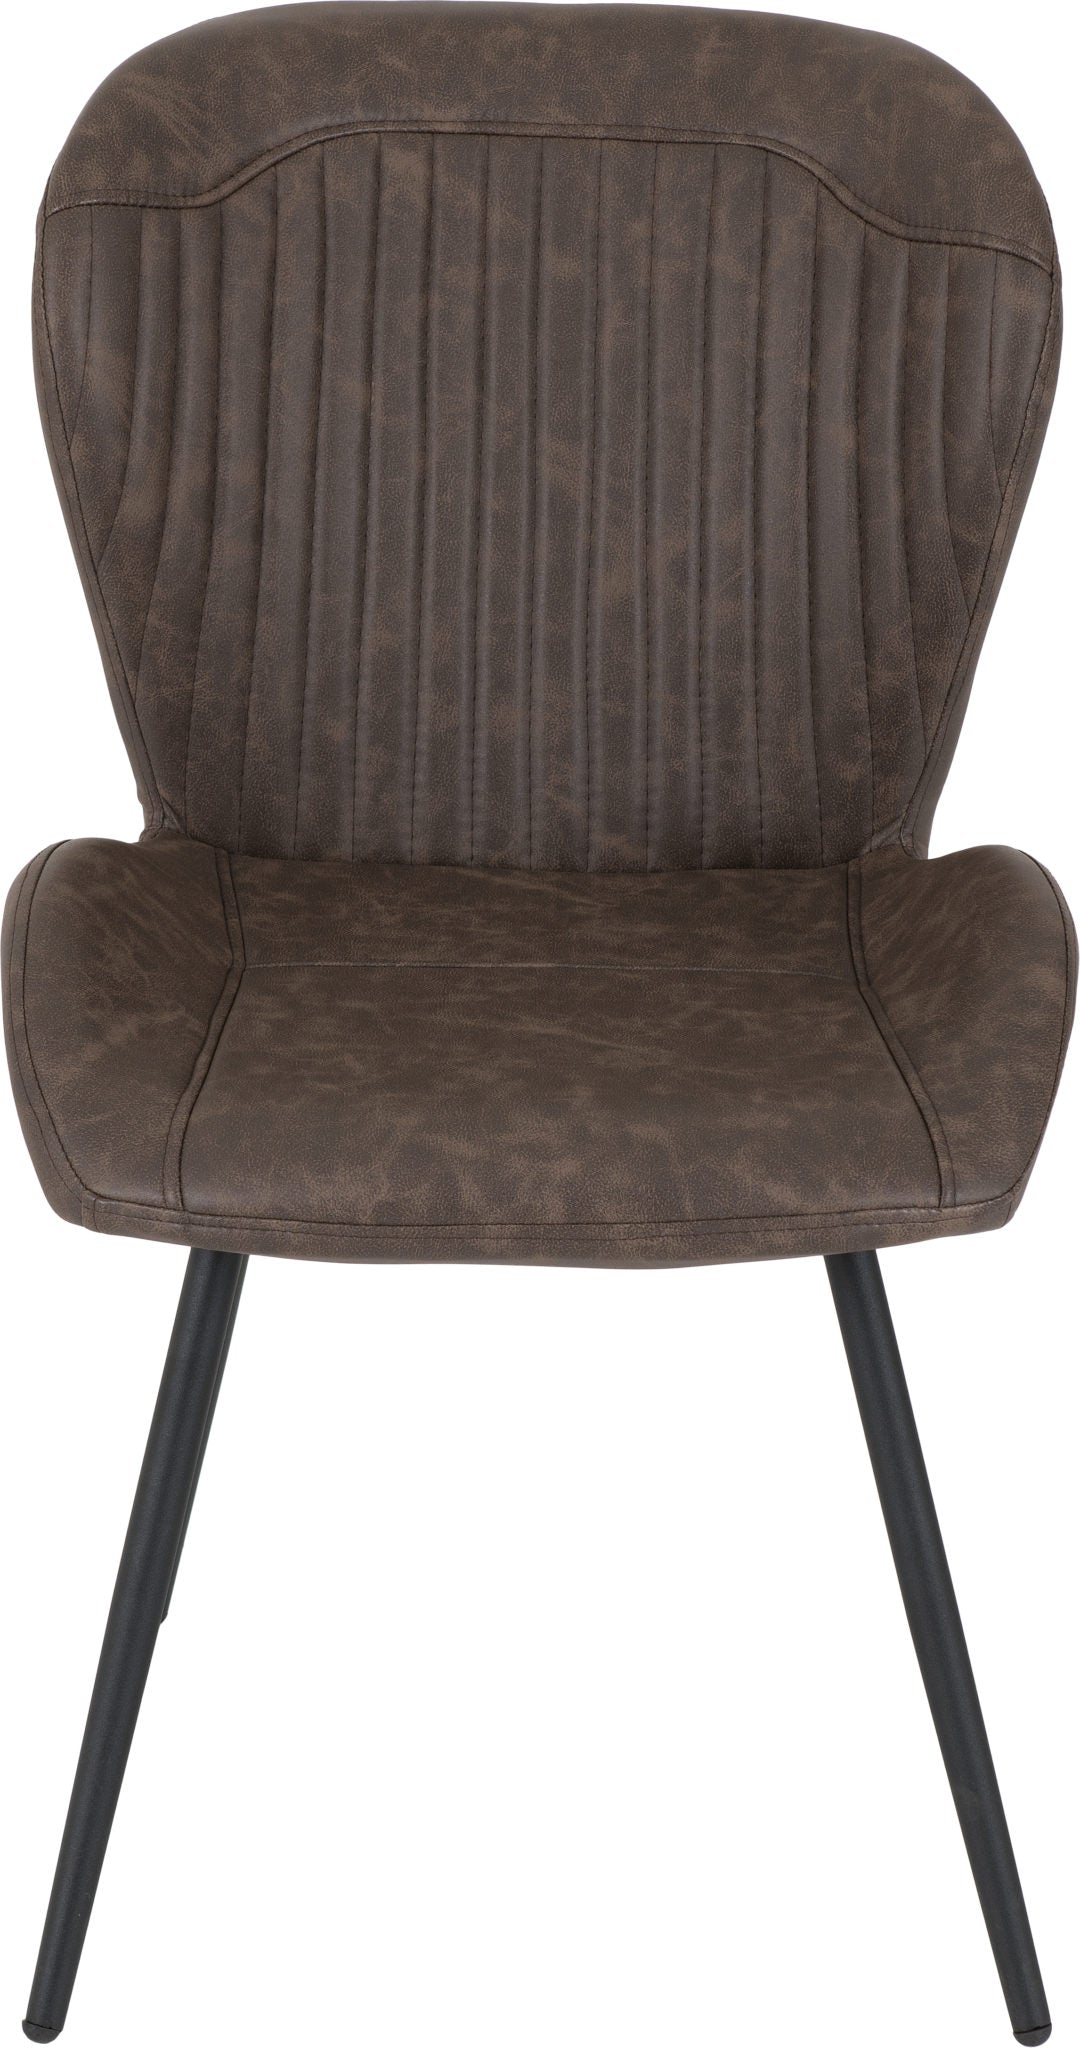 Quebec Chair (Box of 4) Brown Faux Leather